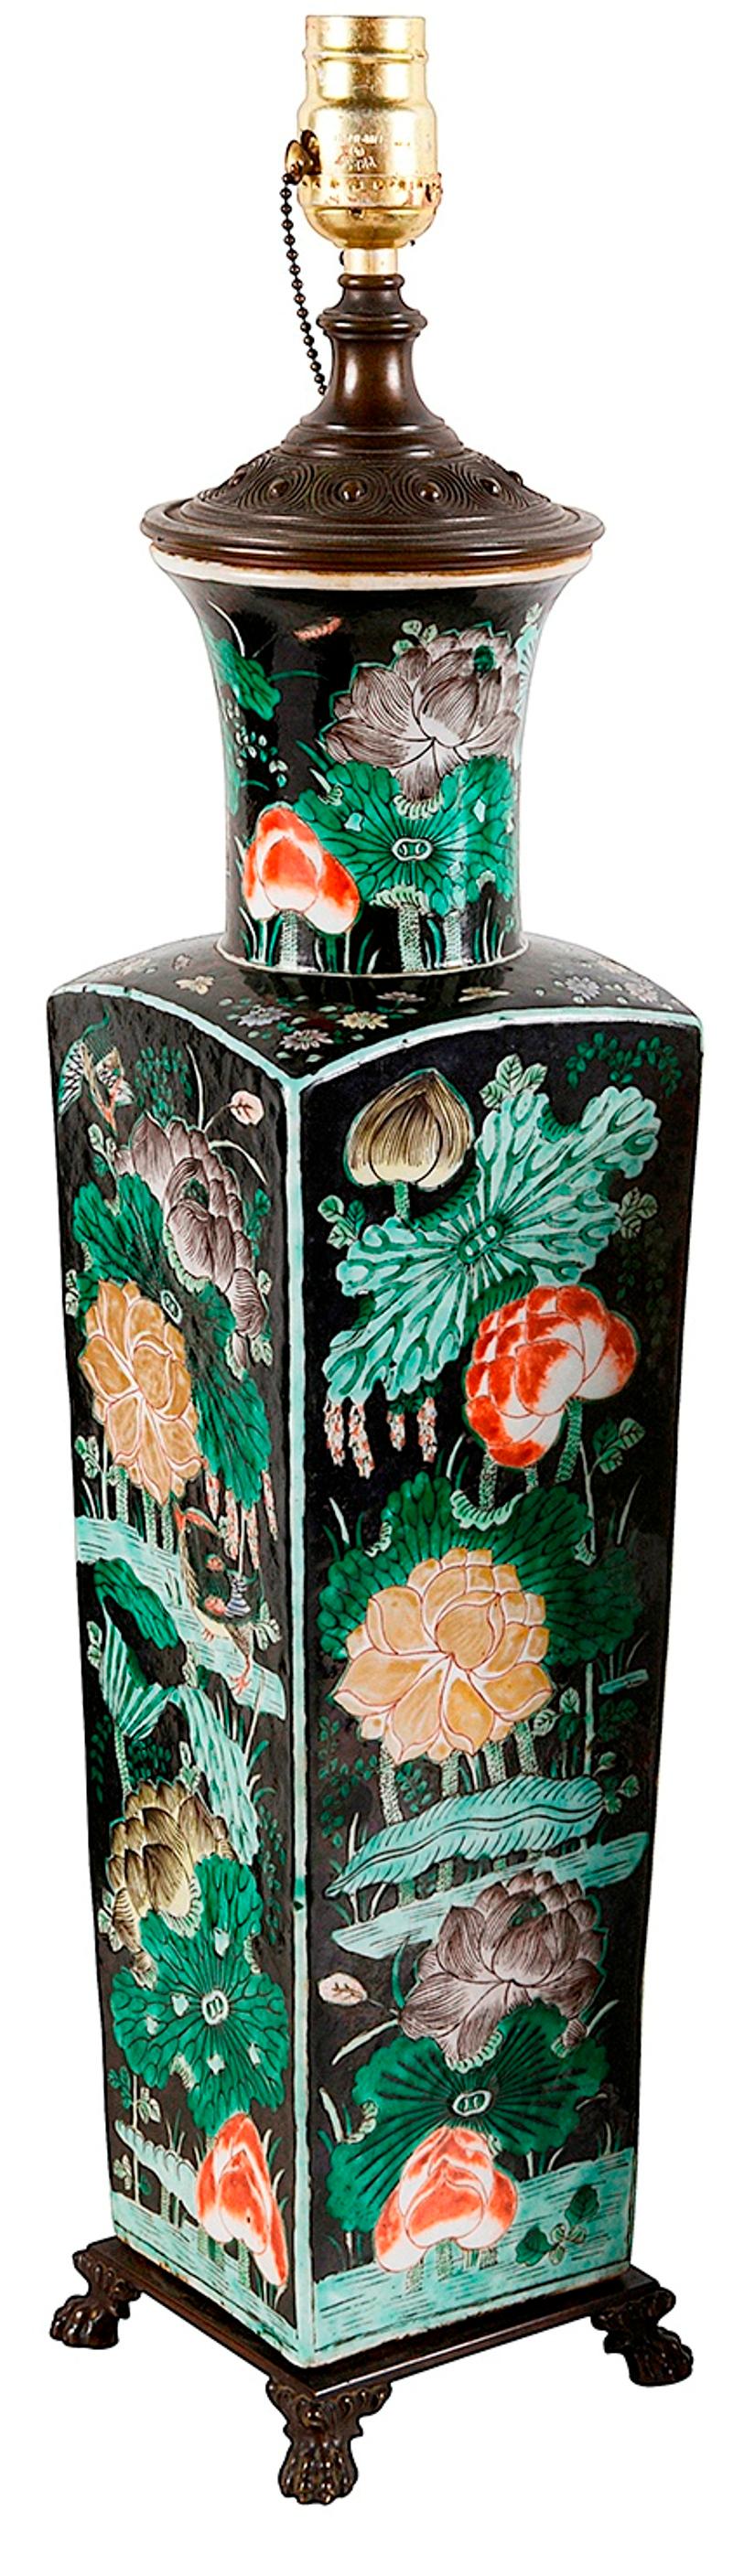 Hand-Painted 19th Century Chinese Famille Noire Porcelain Vase / Lamp For Sale